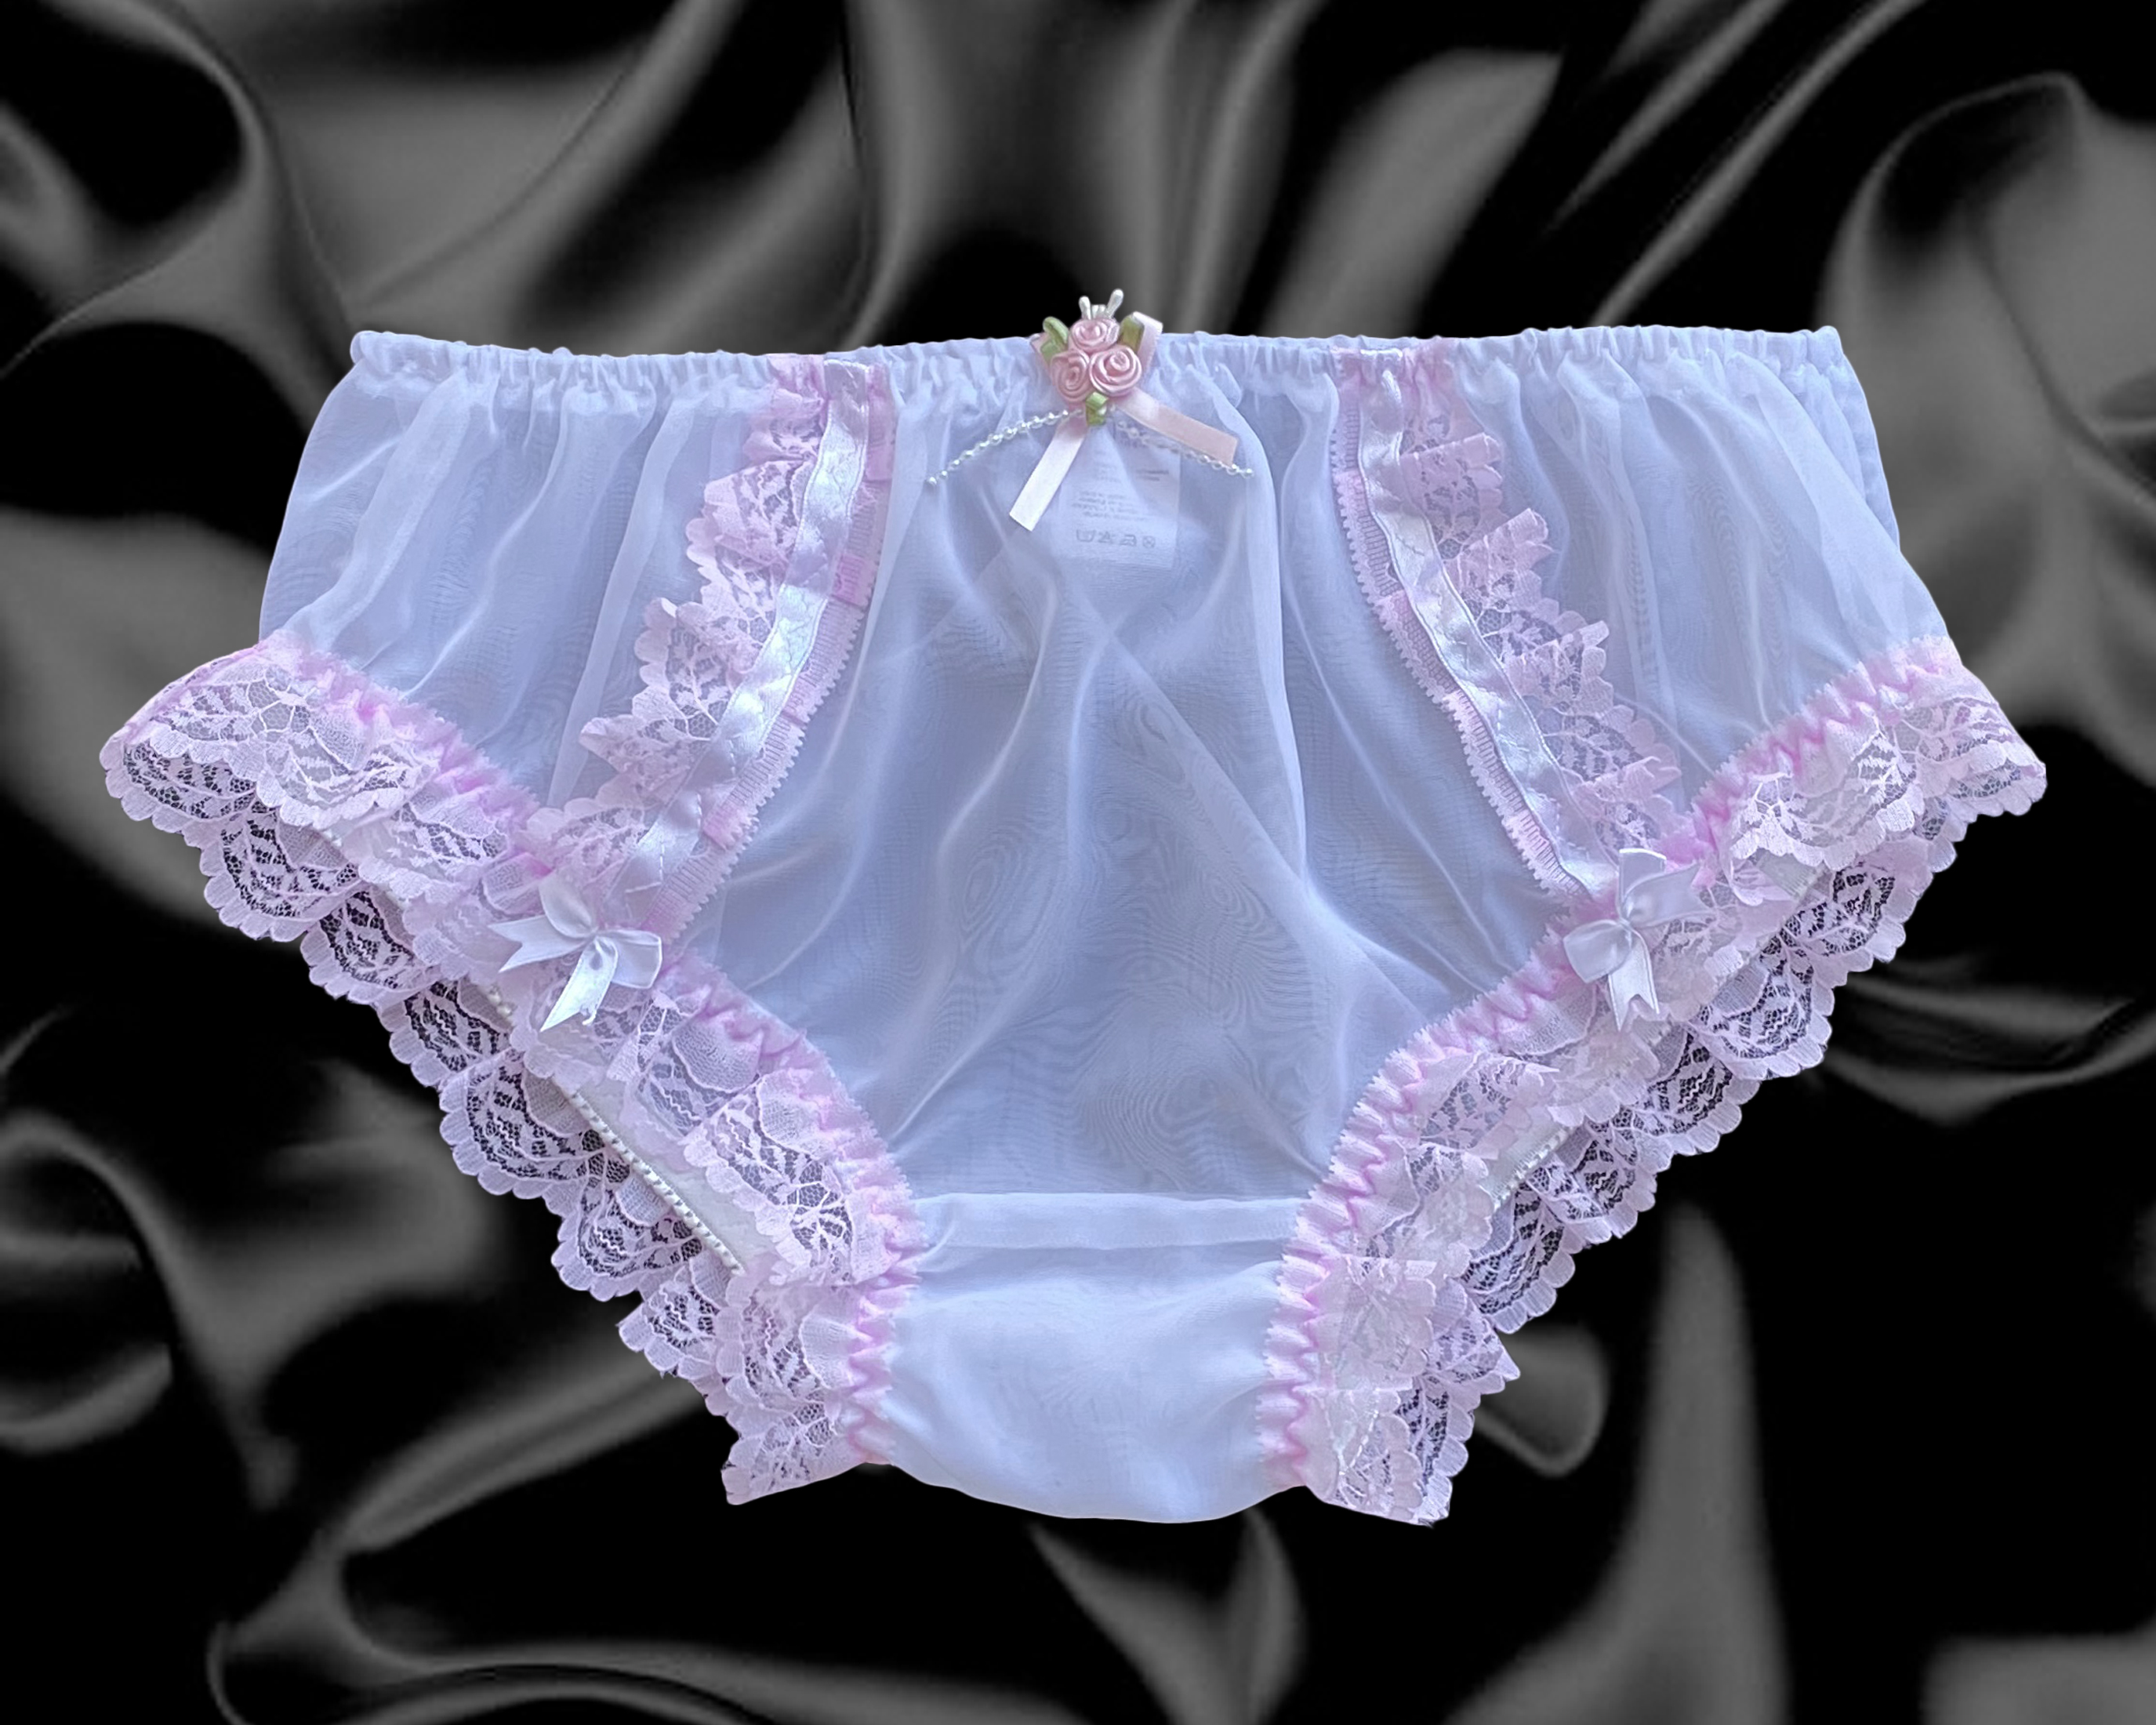 THONG WHITE UK SIZES 8 & 12 FRILLY SOFT MESH SATIN BOW STRETCHY KNICKERS BNWT